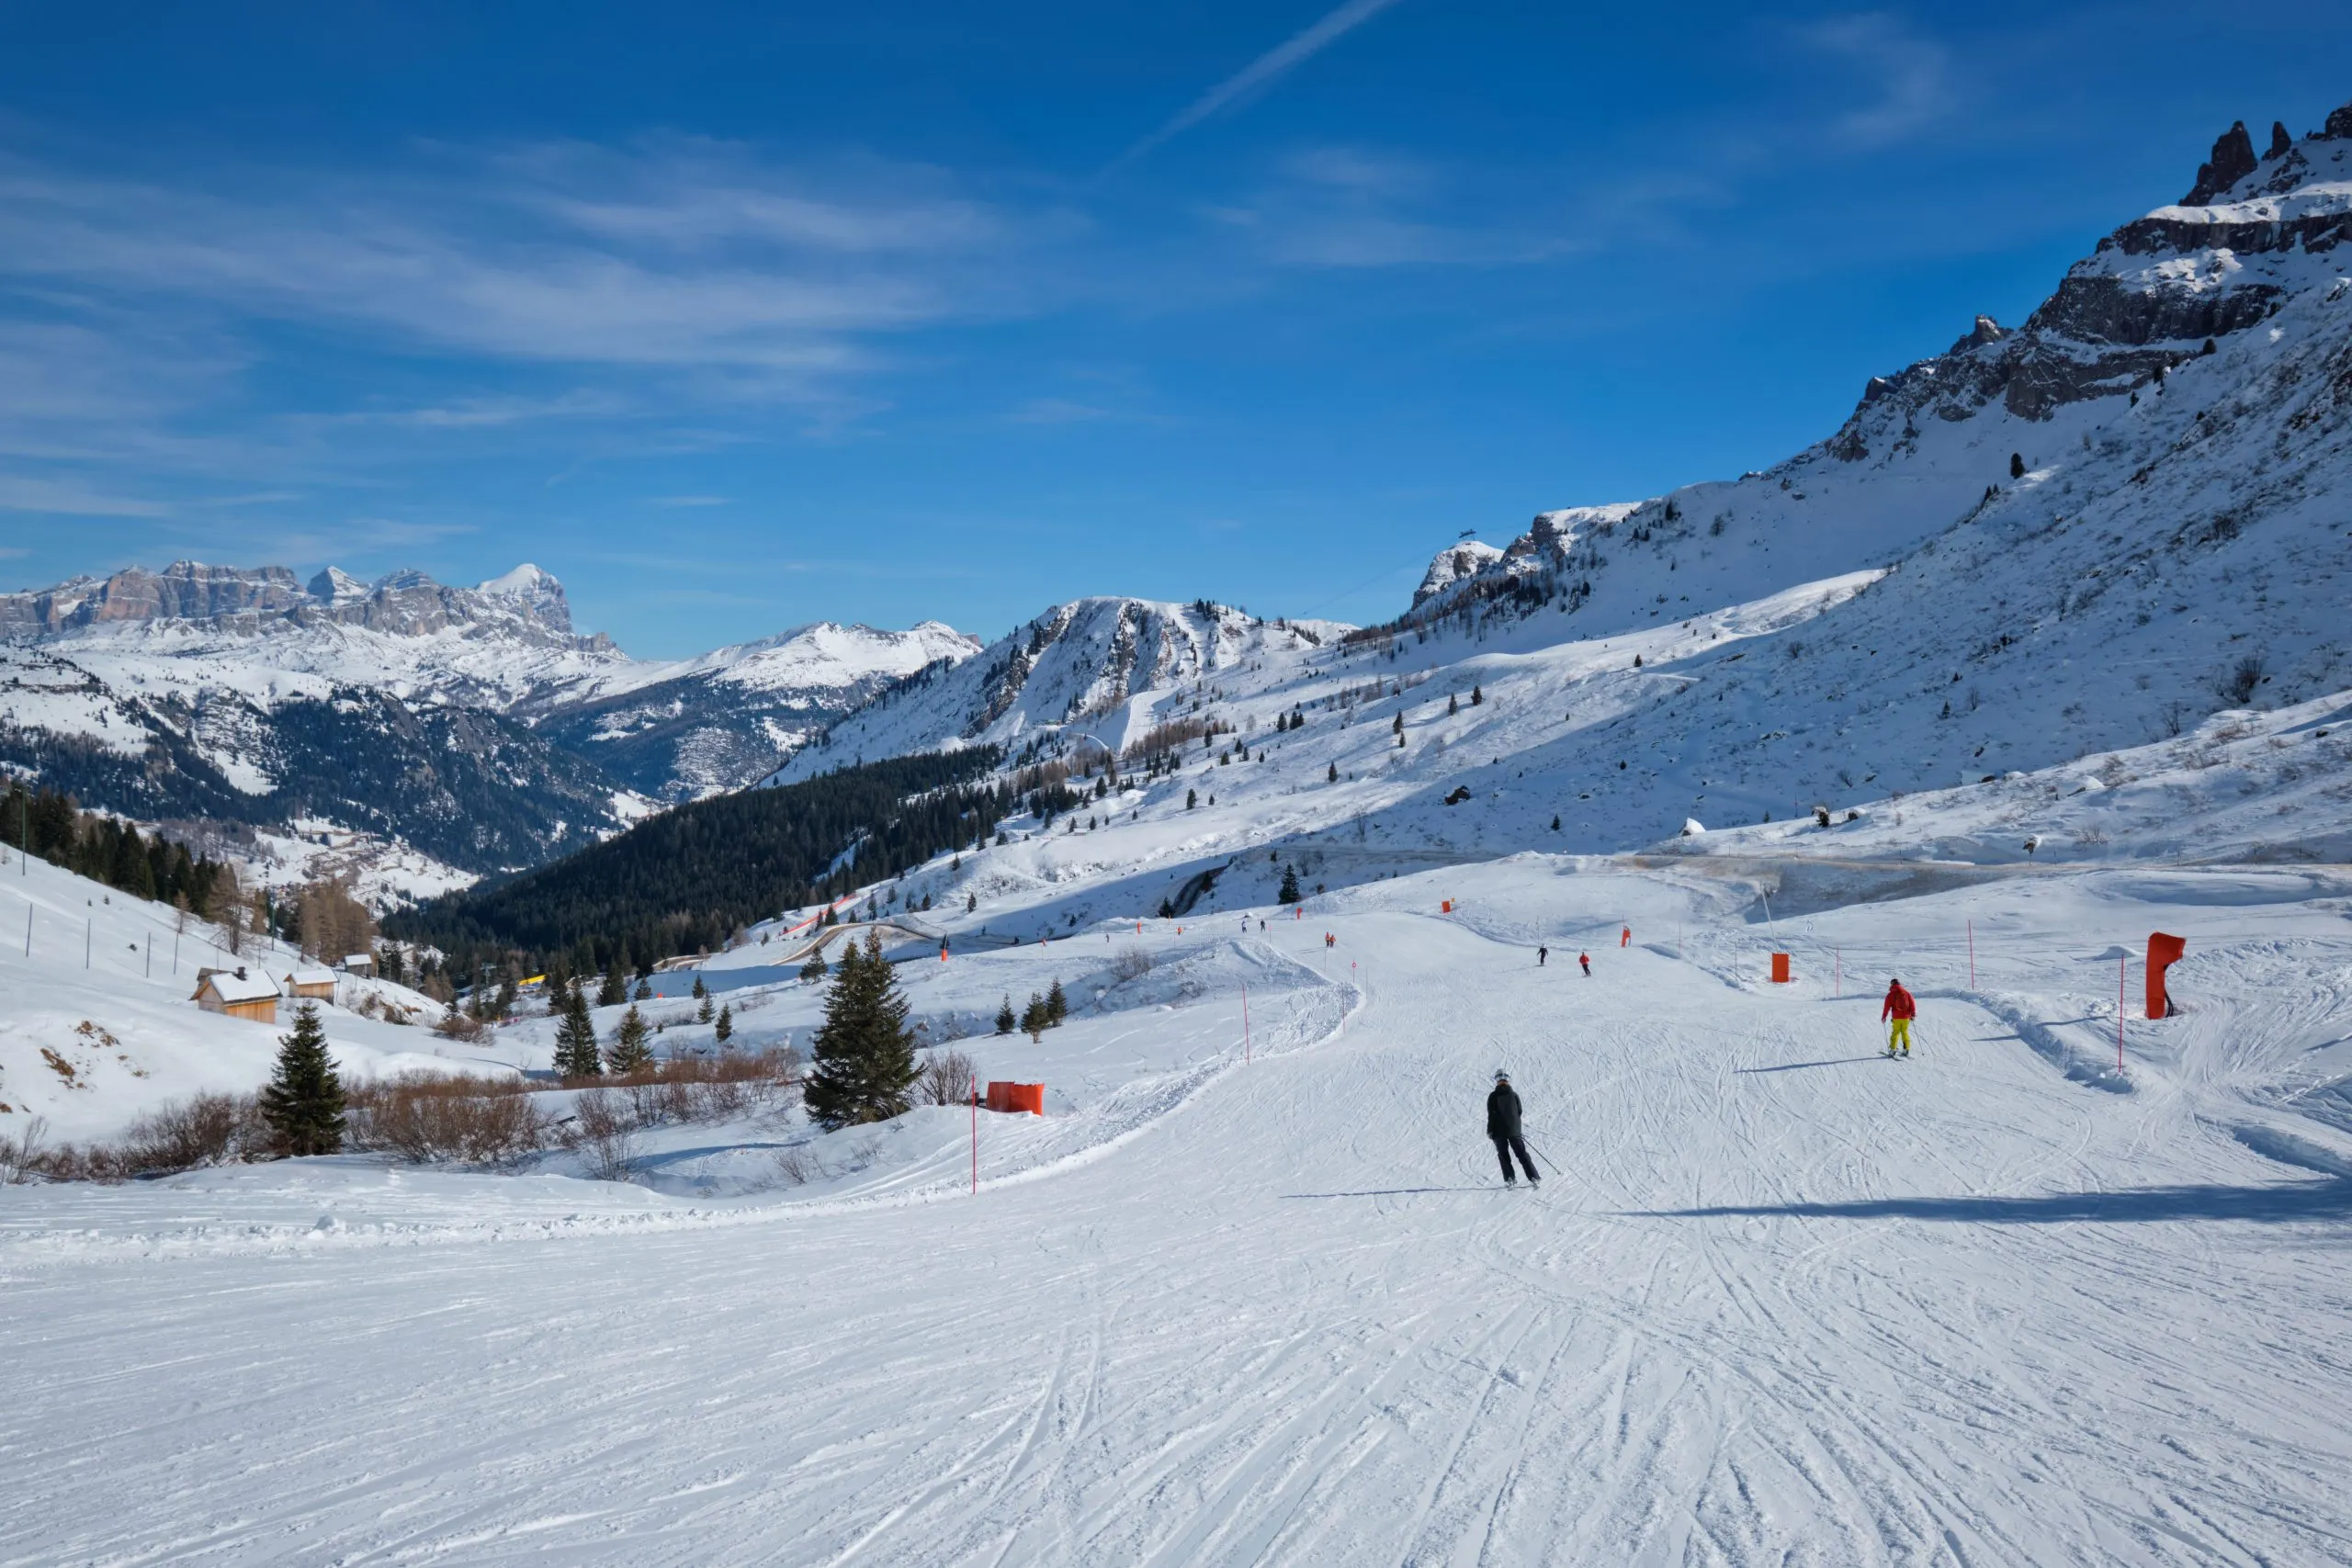 Canazei, Italy - February 16, 2019: View of a ski resort piste with people skiing in Dolomites in Italy. Canazei, Italy